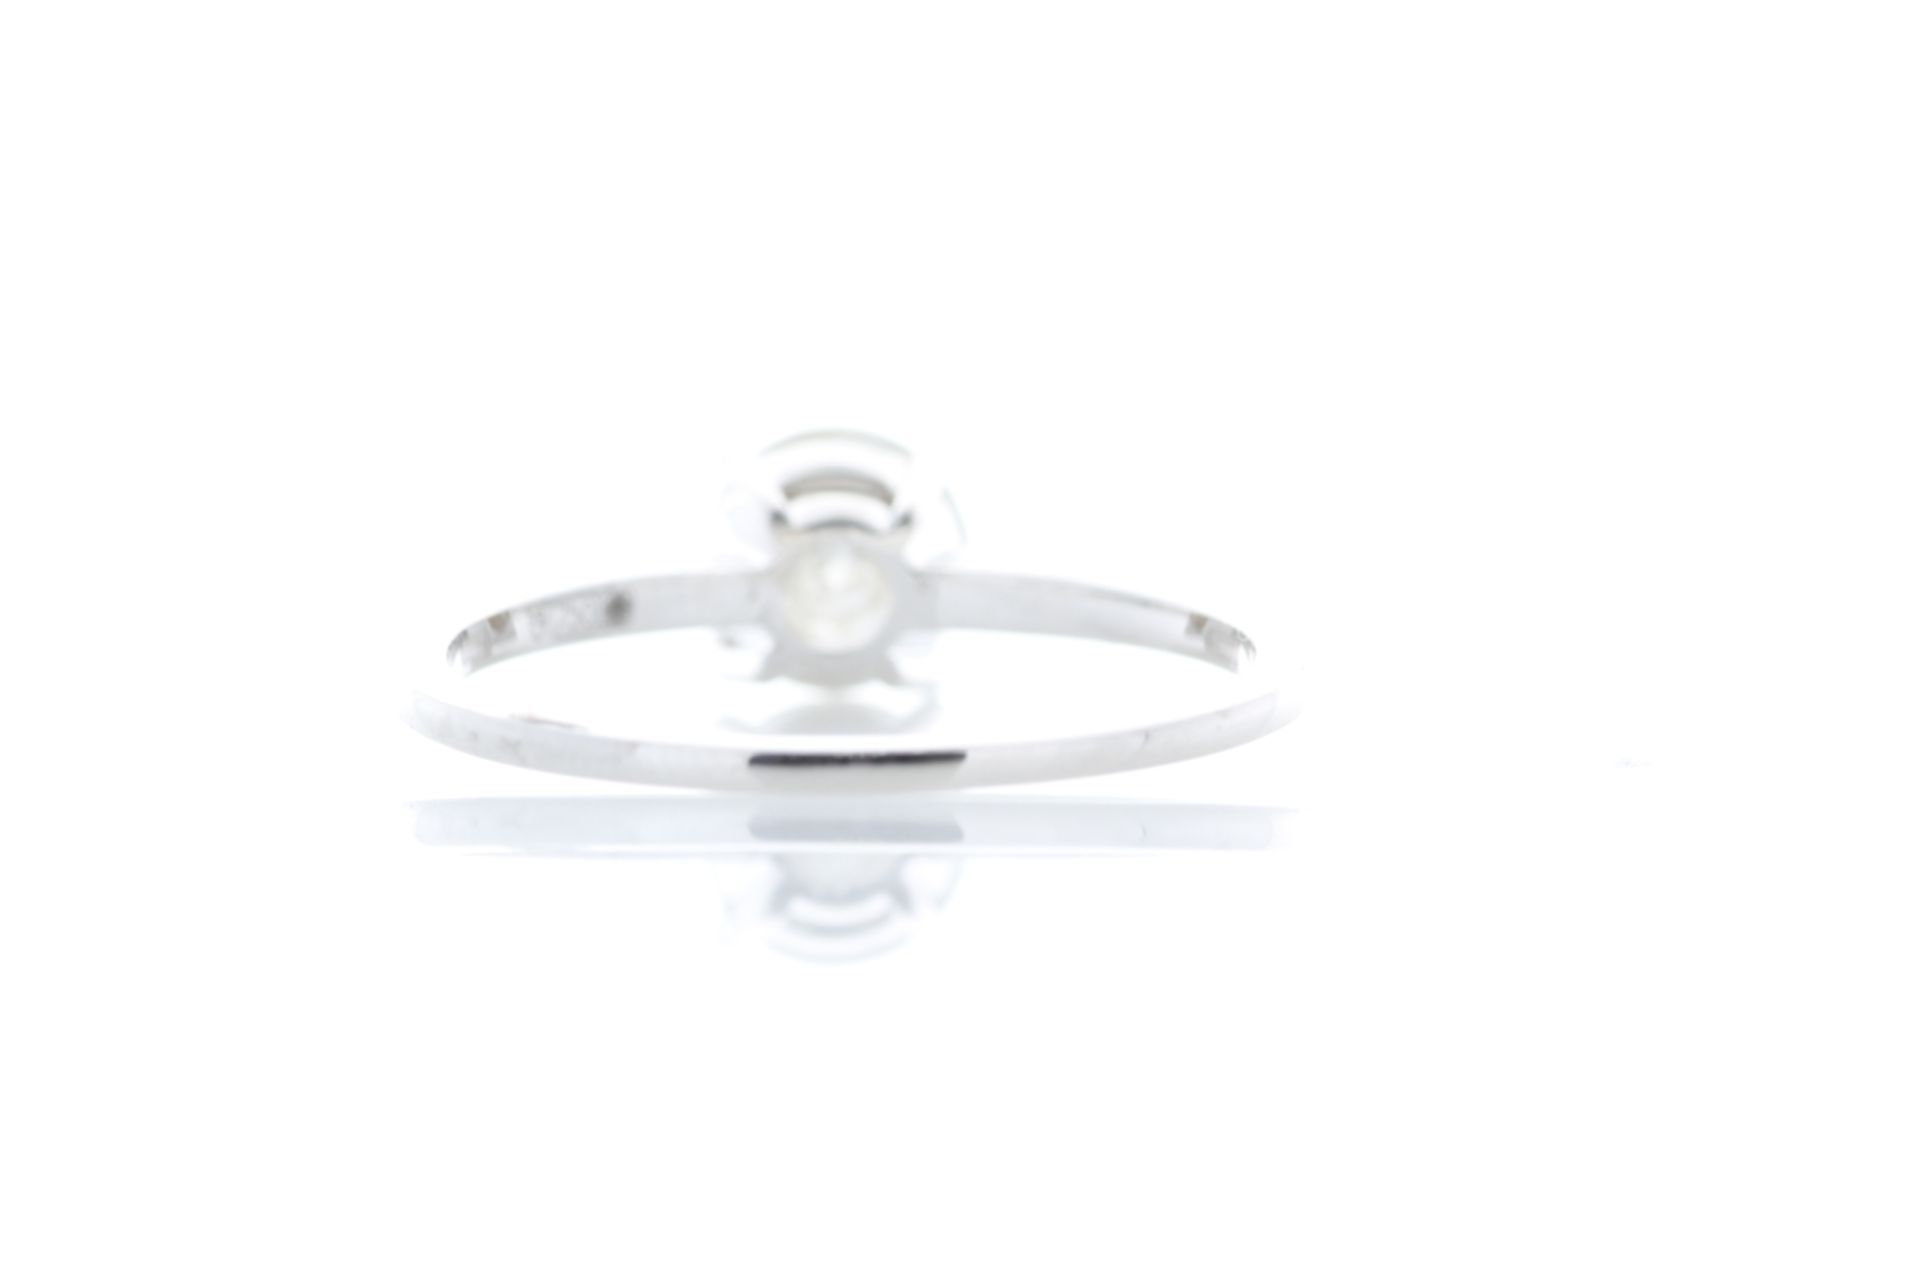 Valued by GIE £12,955.00 - 18ct White Gold Single Stone Prong Set With Stone Set Shoulders Diamond - Image 3 of 5